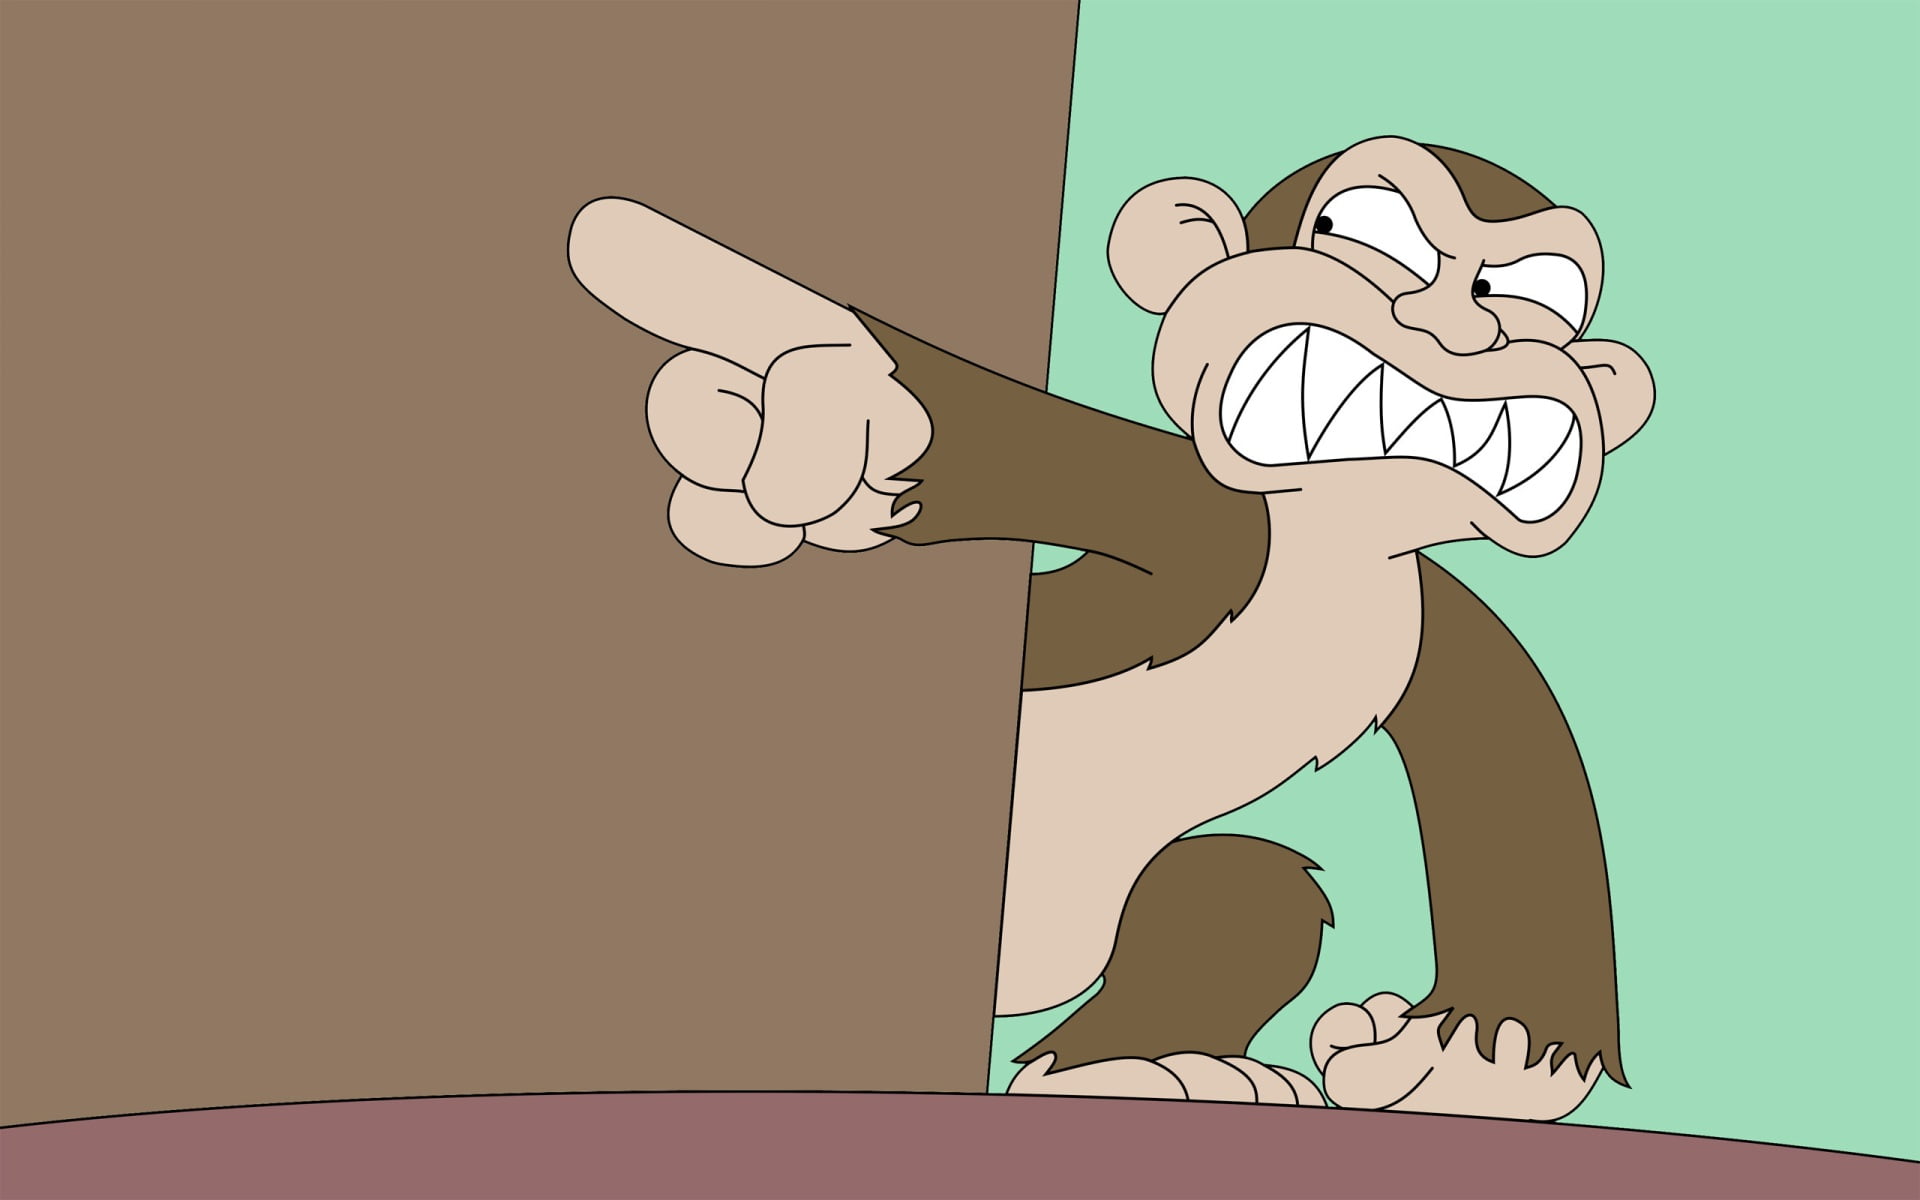 Evil Monkey Family Guy, monkey beside wall pointing at it's right illustration